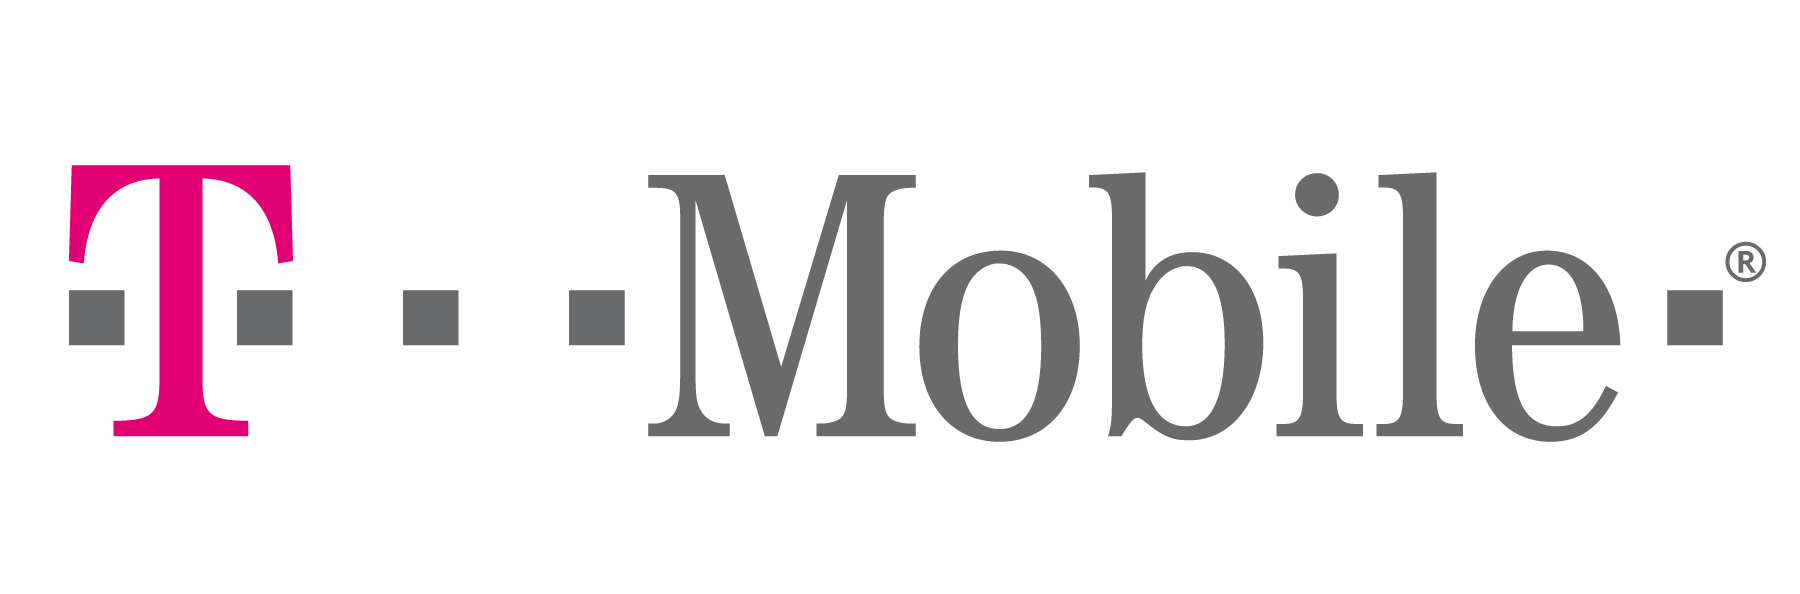 T Mobile logo and link to website